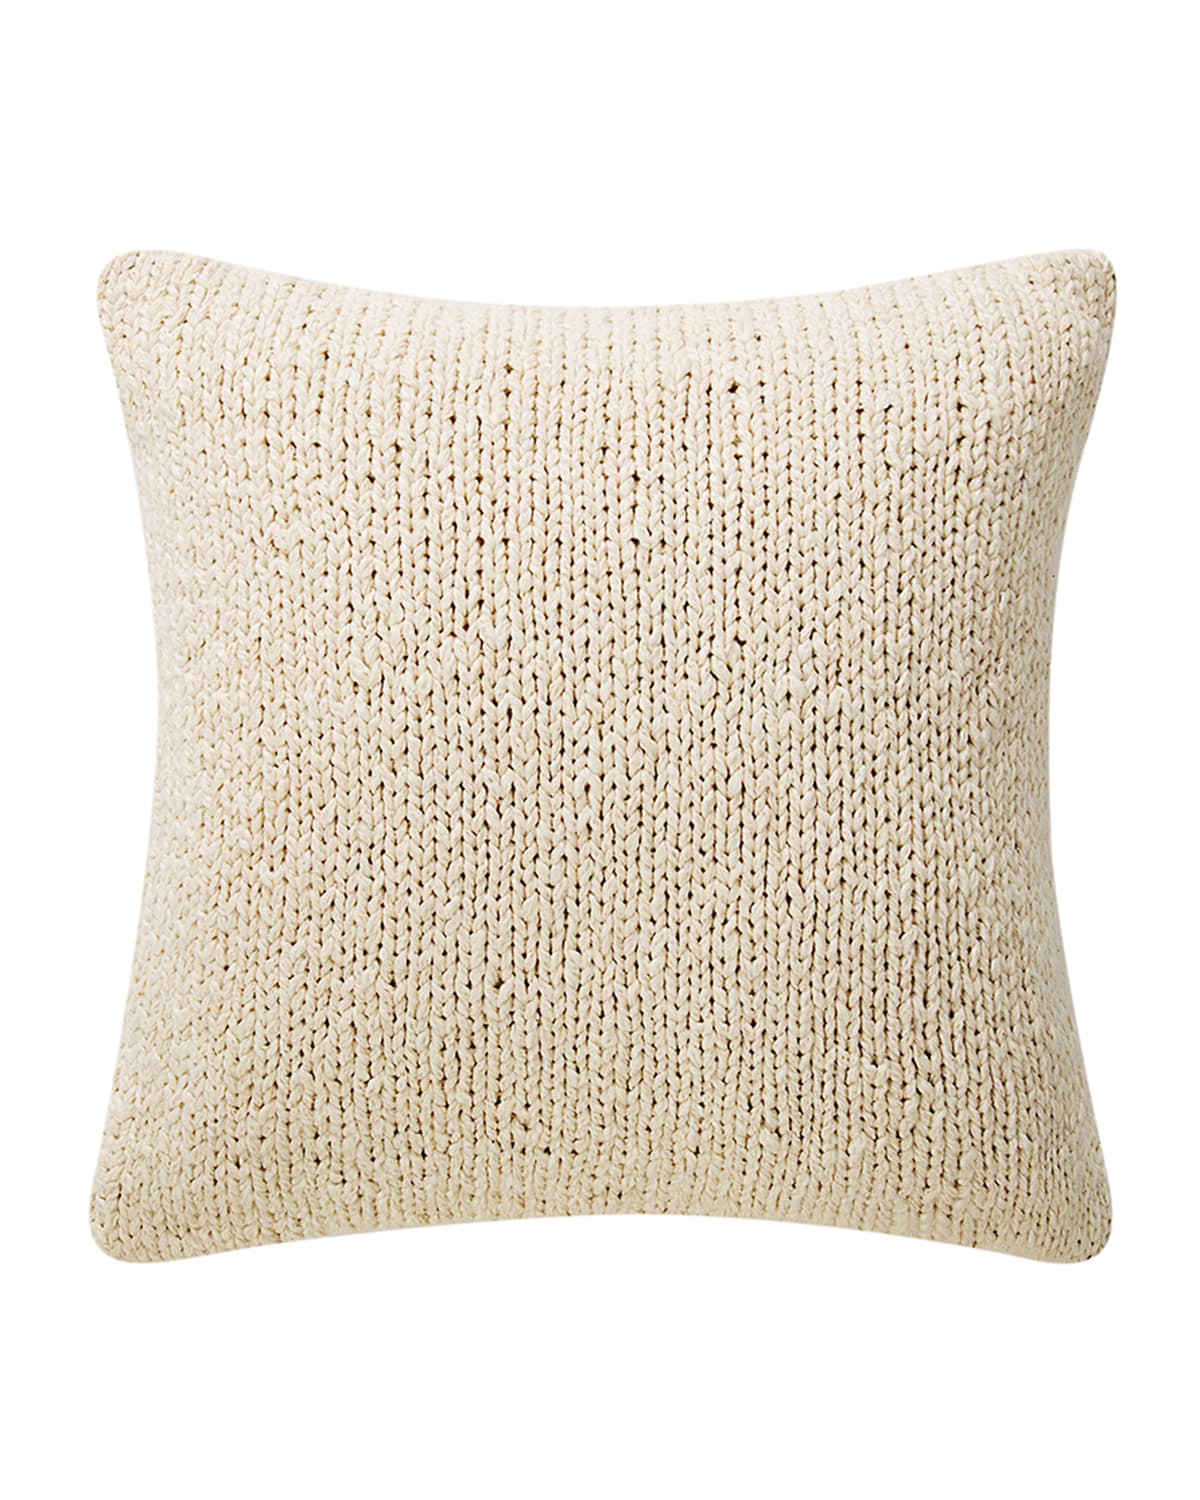 Image Waterford Gloria Square Pillow